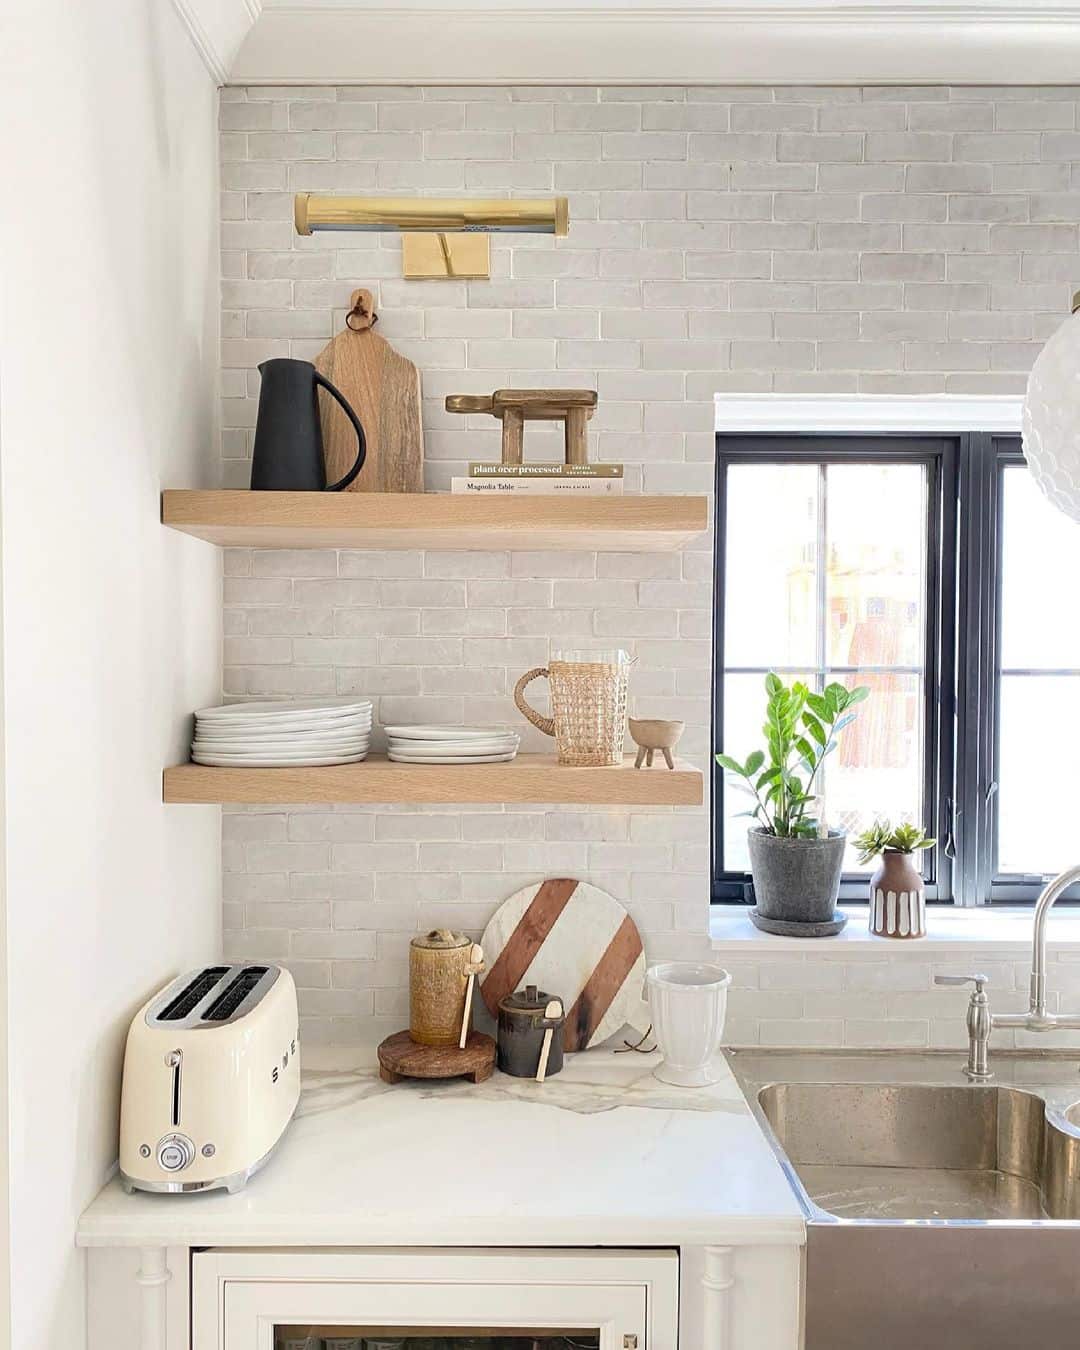 35 Open Shelving Kitchen Ideas You'll Fall in Love With